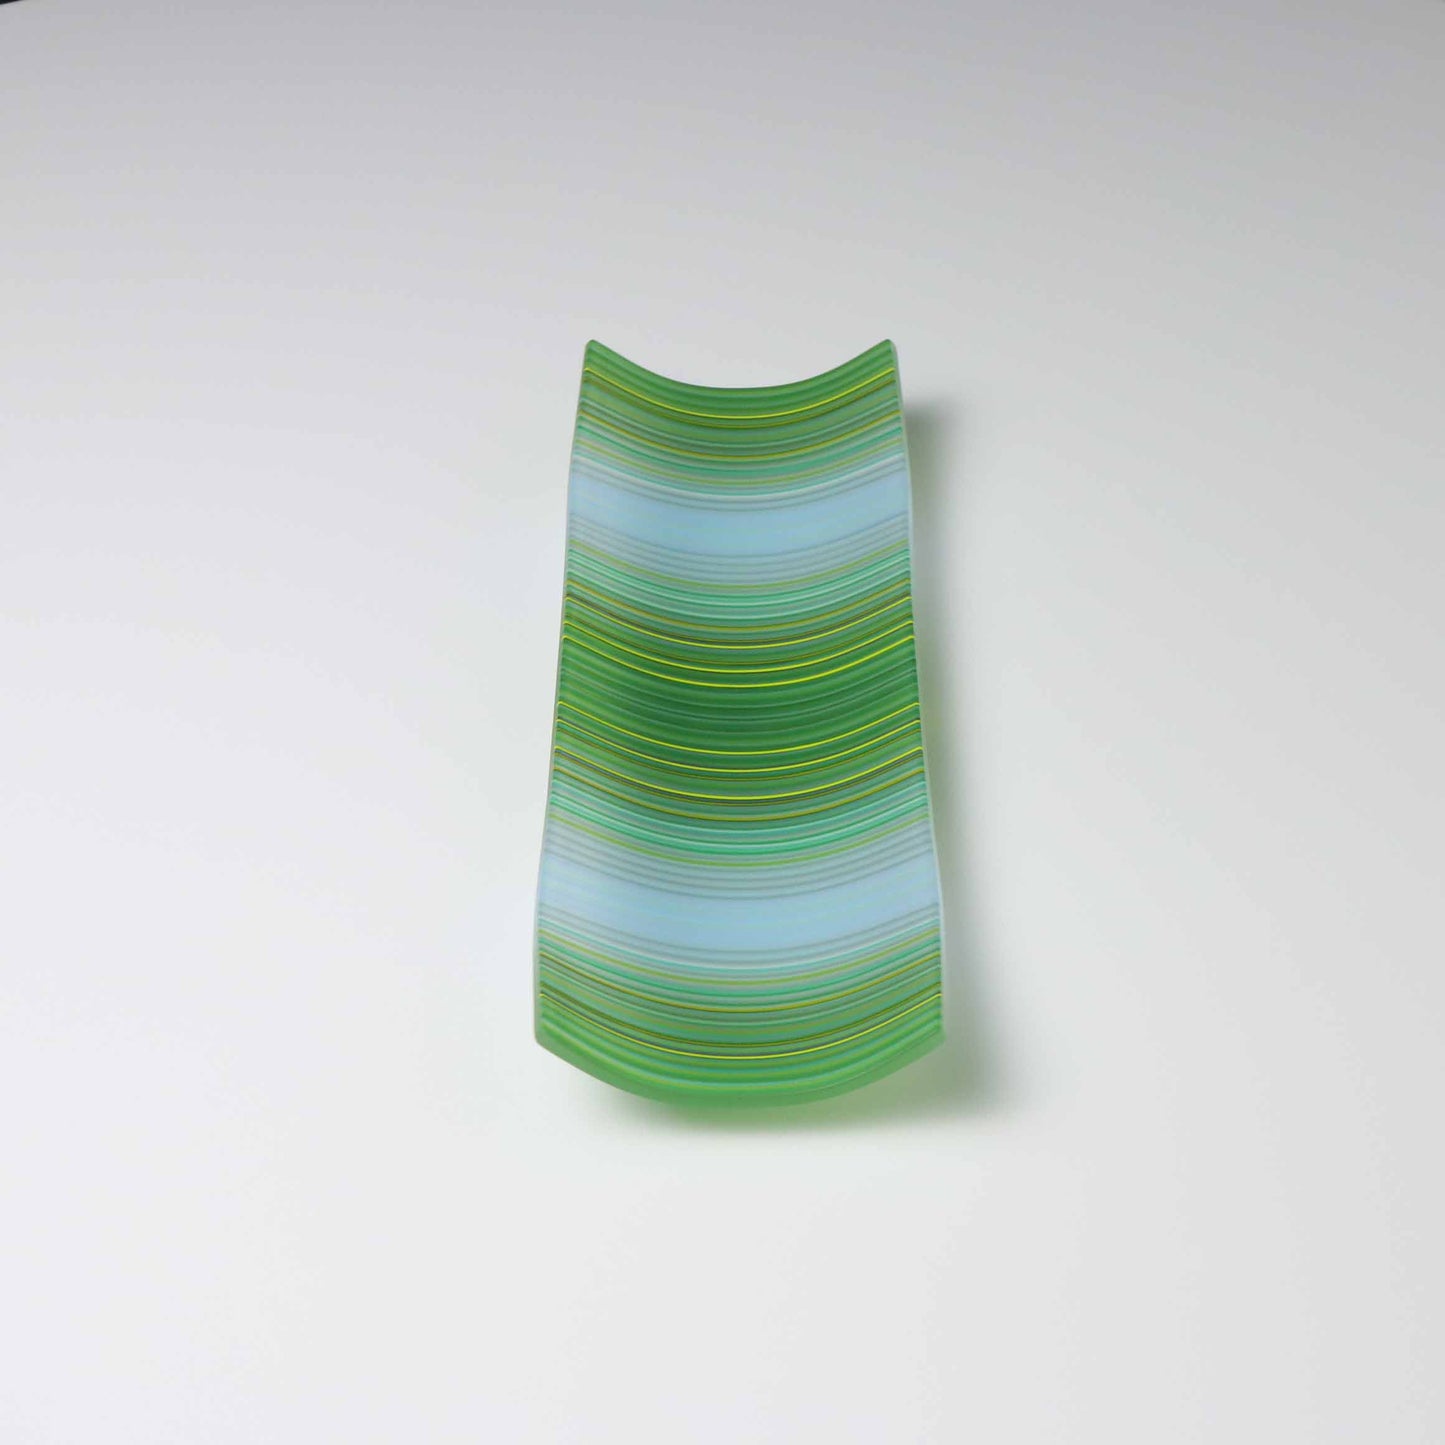 S2179 | Rectangular Shaped ColourWave Glass Plate | Green and Pale Blue